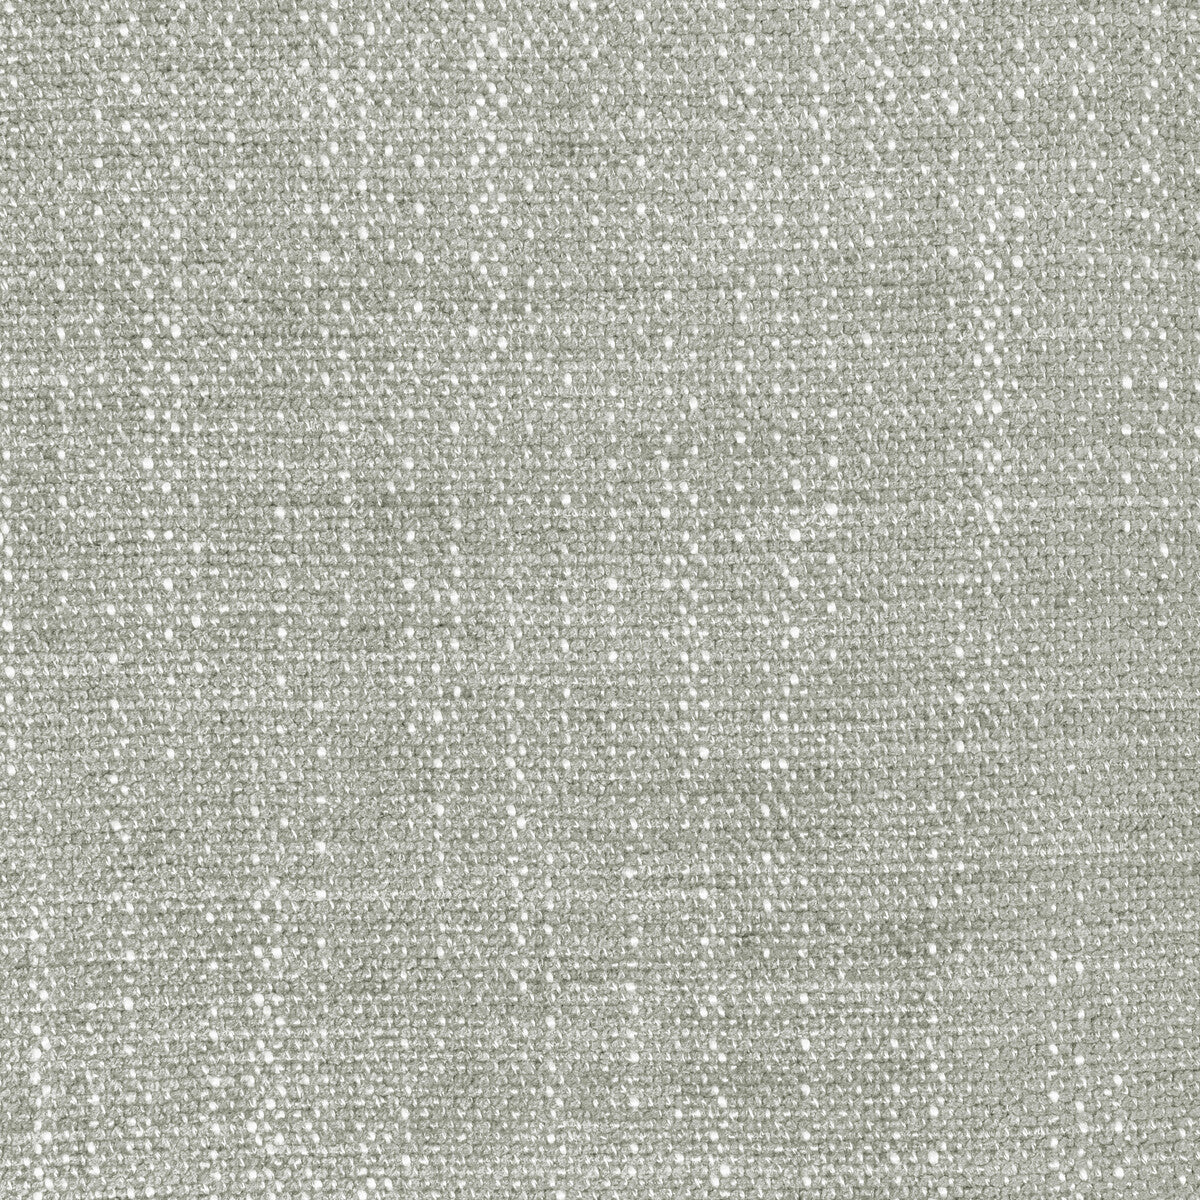 Kravet Design fabric in 36408-11 color - pattern 36408.11.0 - by Kravet Design in the Performance Crypton Home collection